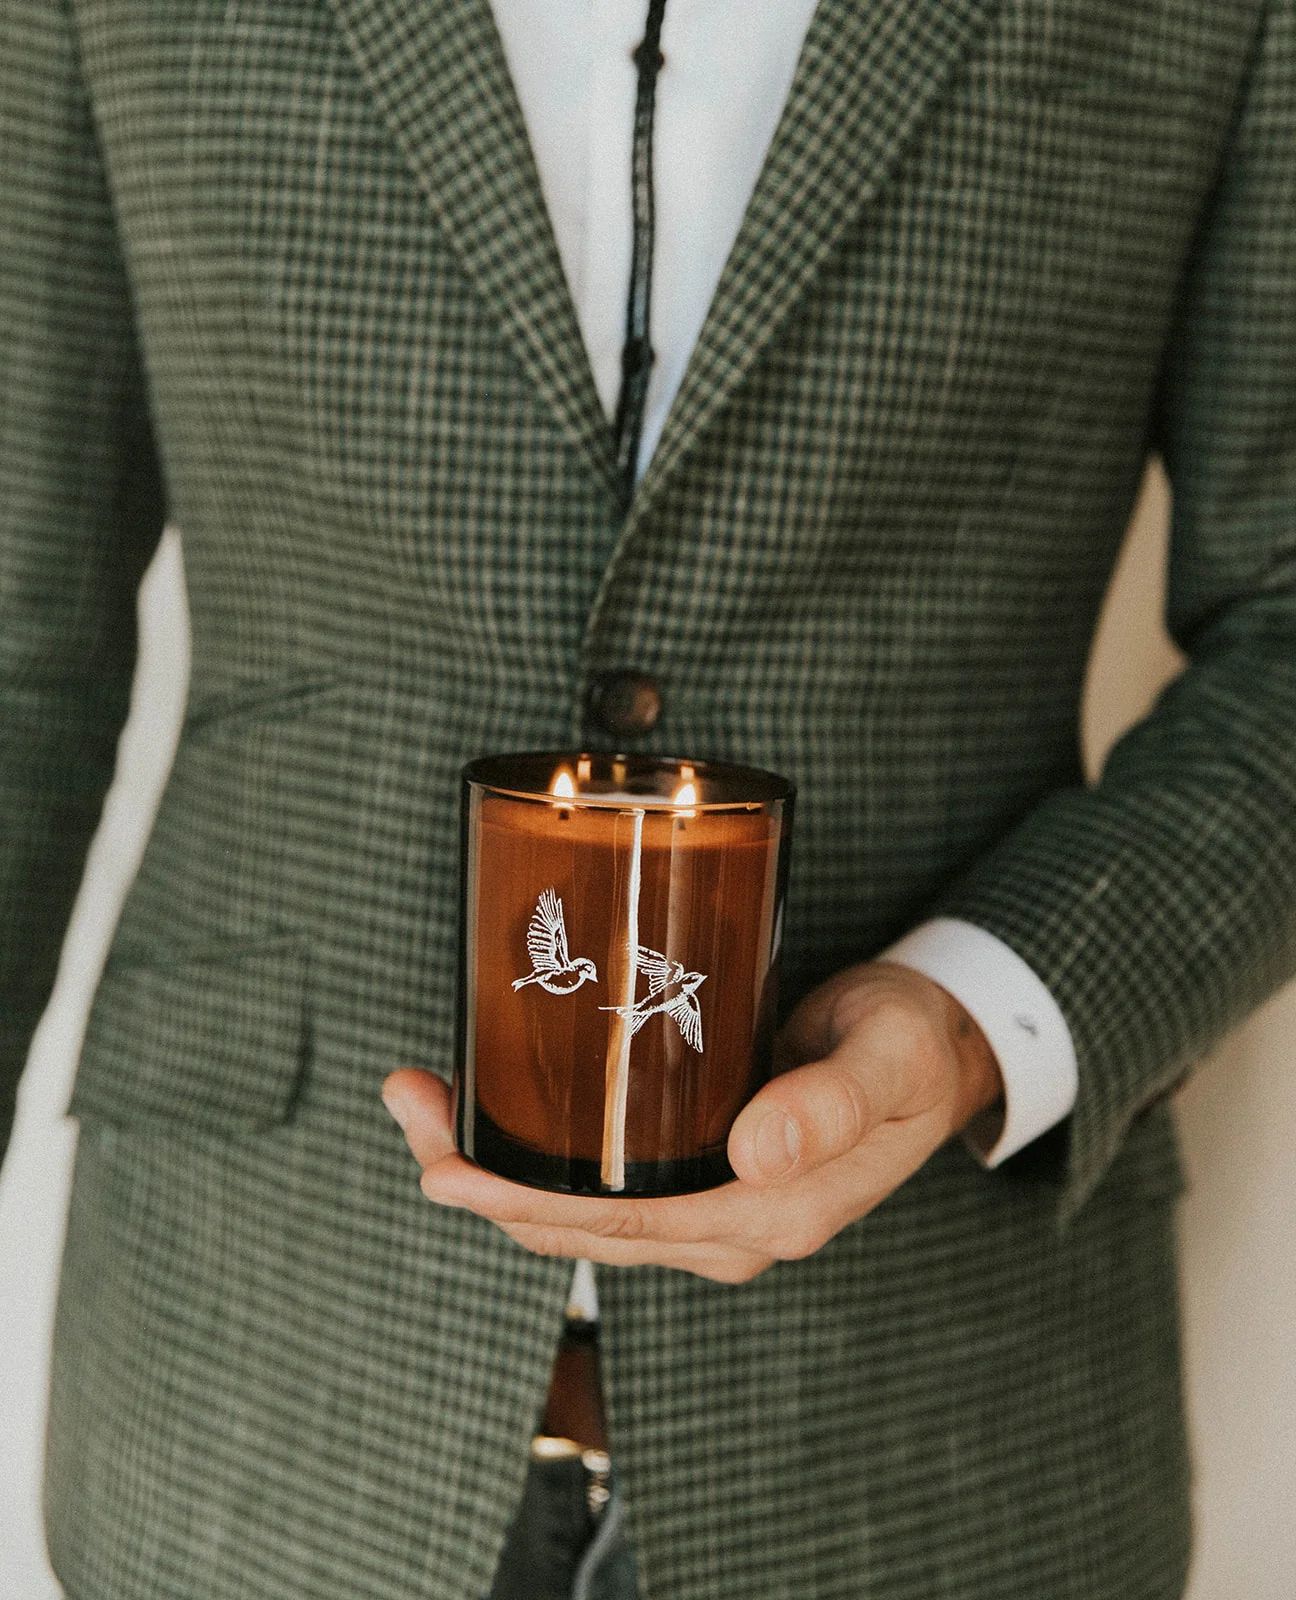 The Signature Candle | Premonition Goods